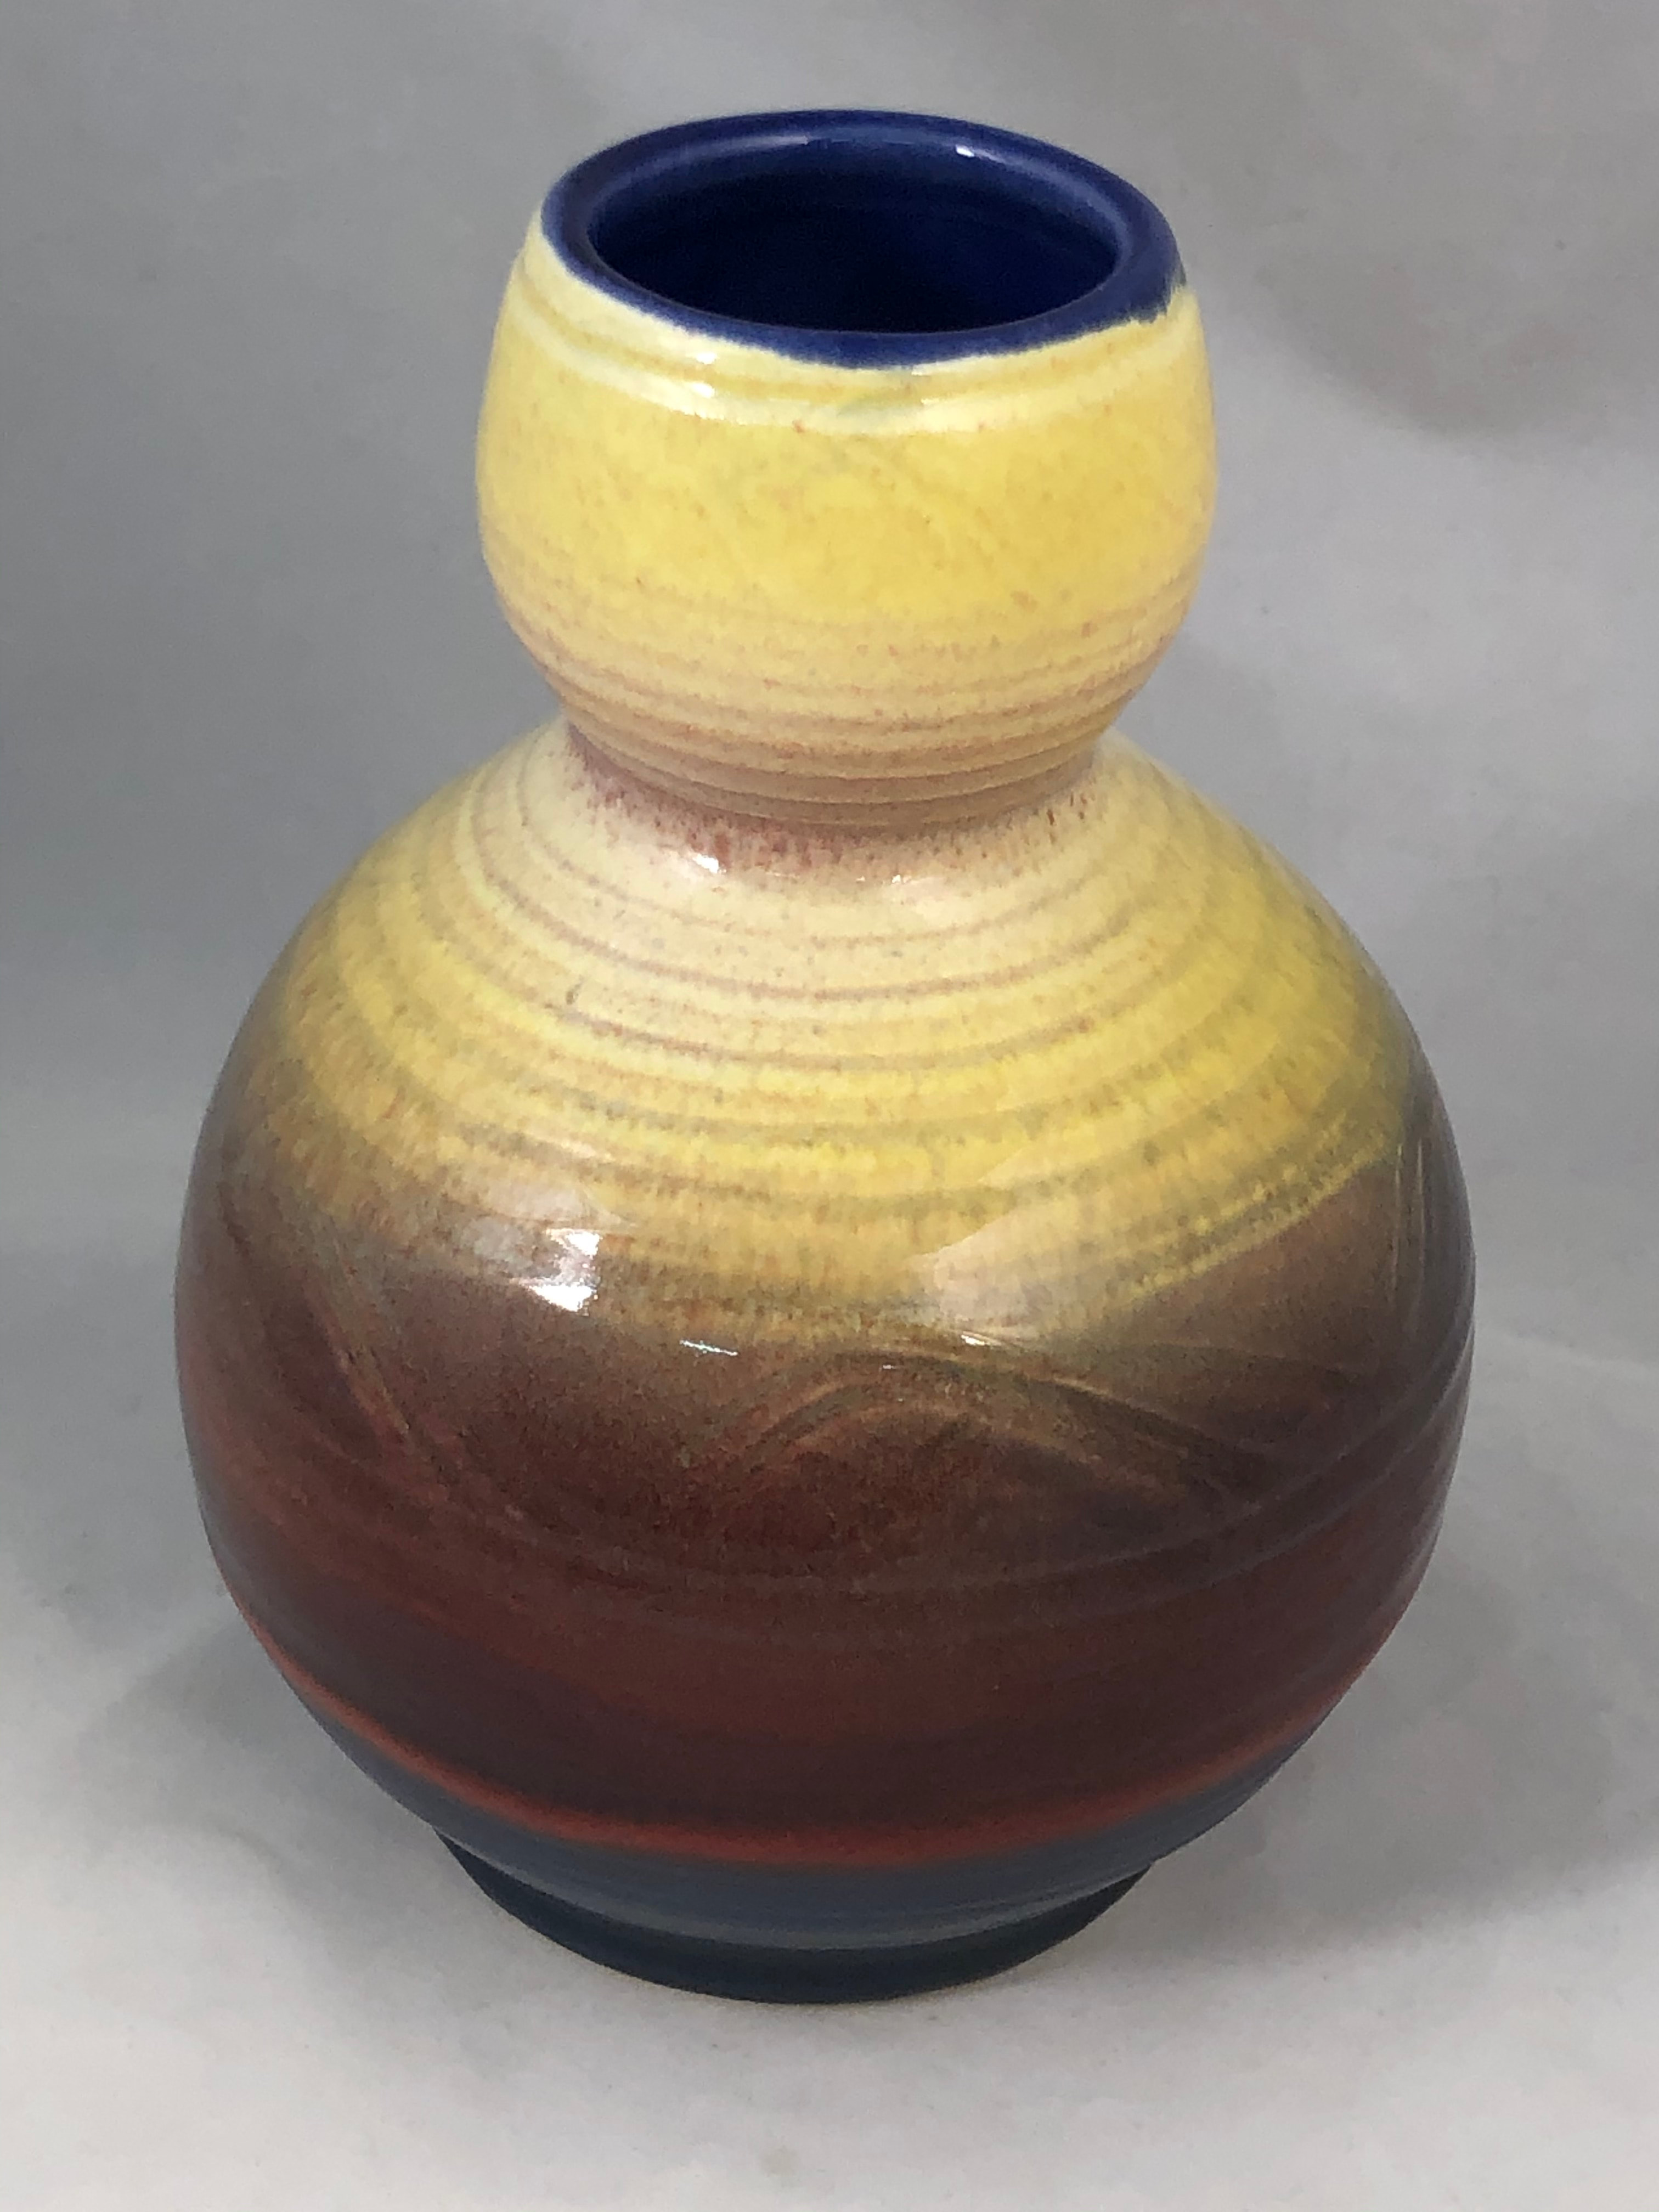 Small vase in yellow, red and cobalt